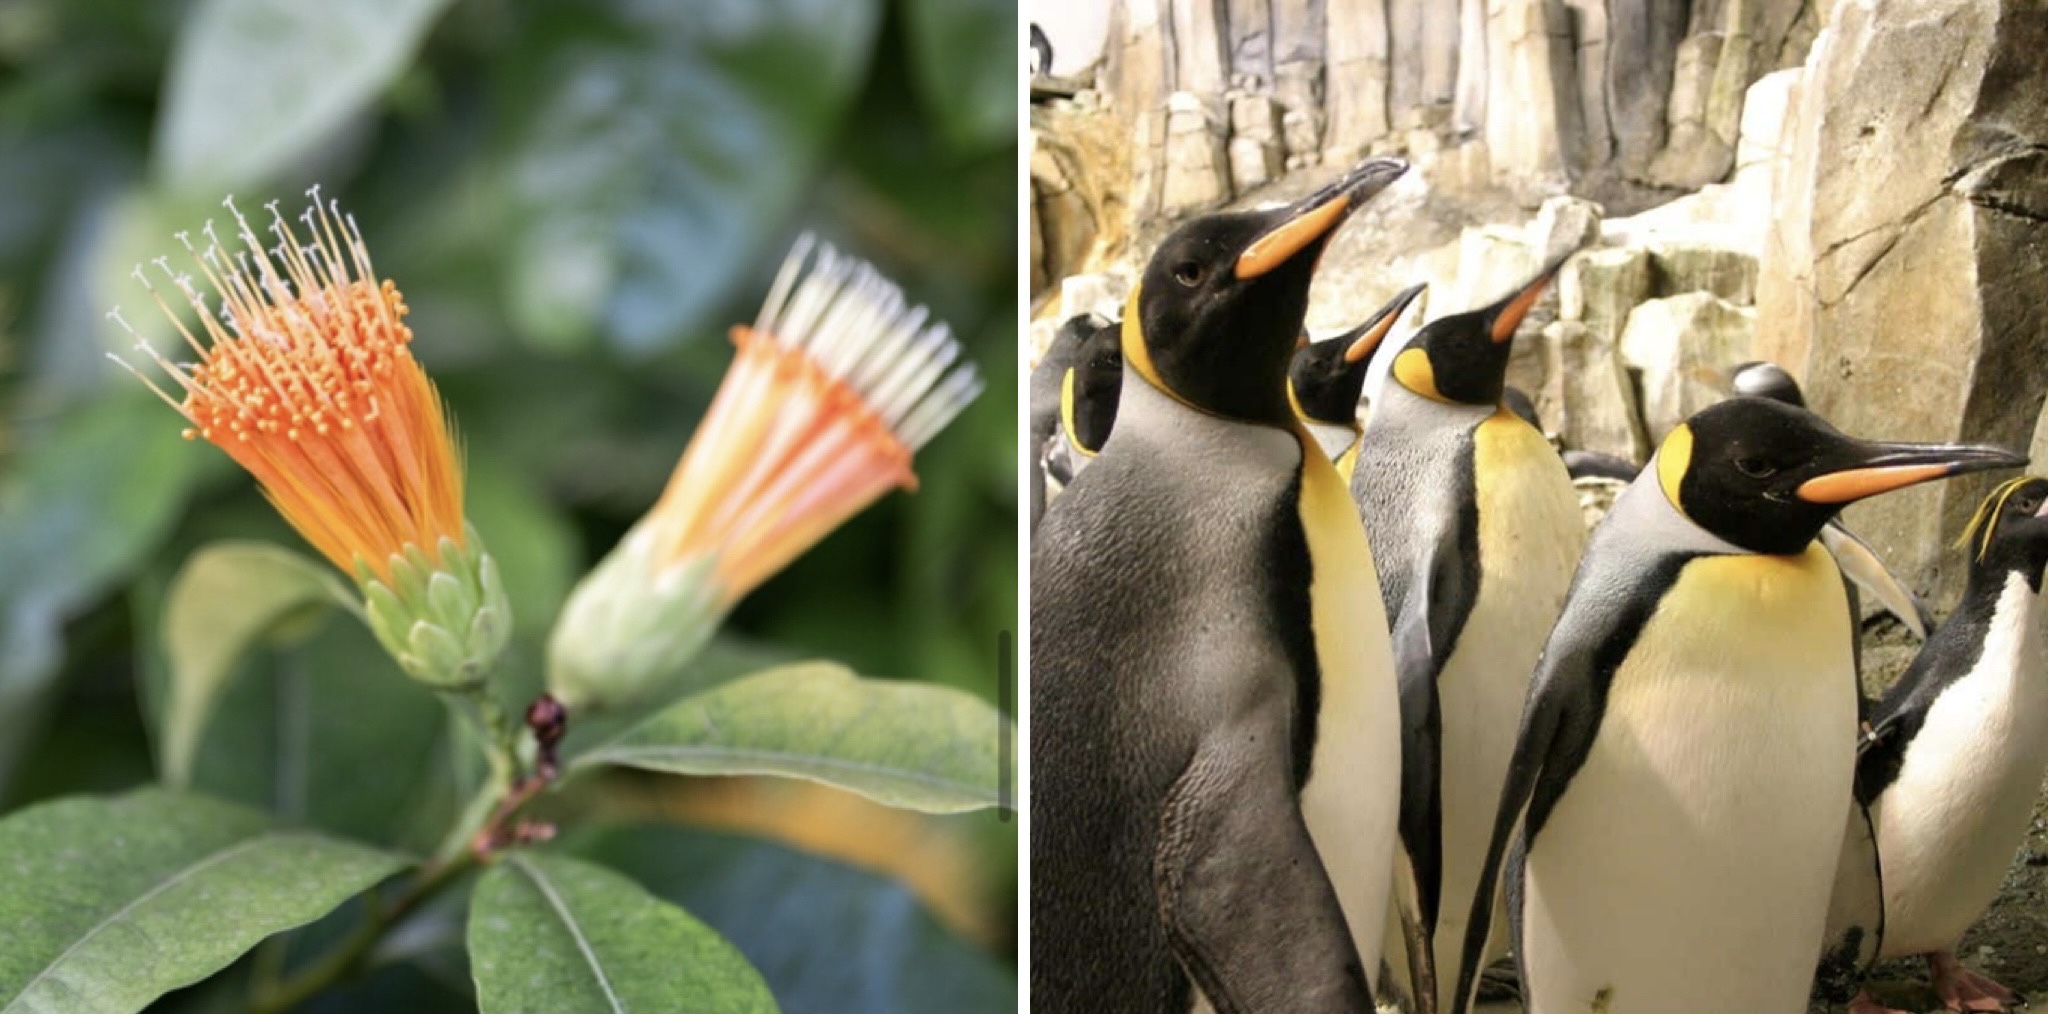 Montrealers can now get 25% off entry to the Botanical Gardens, Biodôme, Biosphere & more